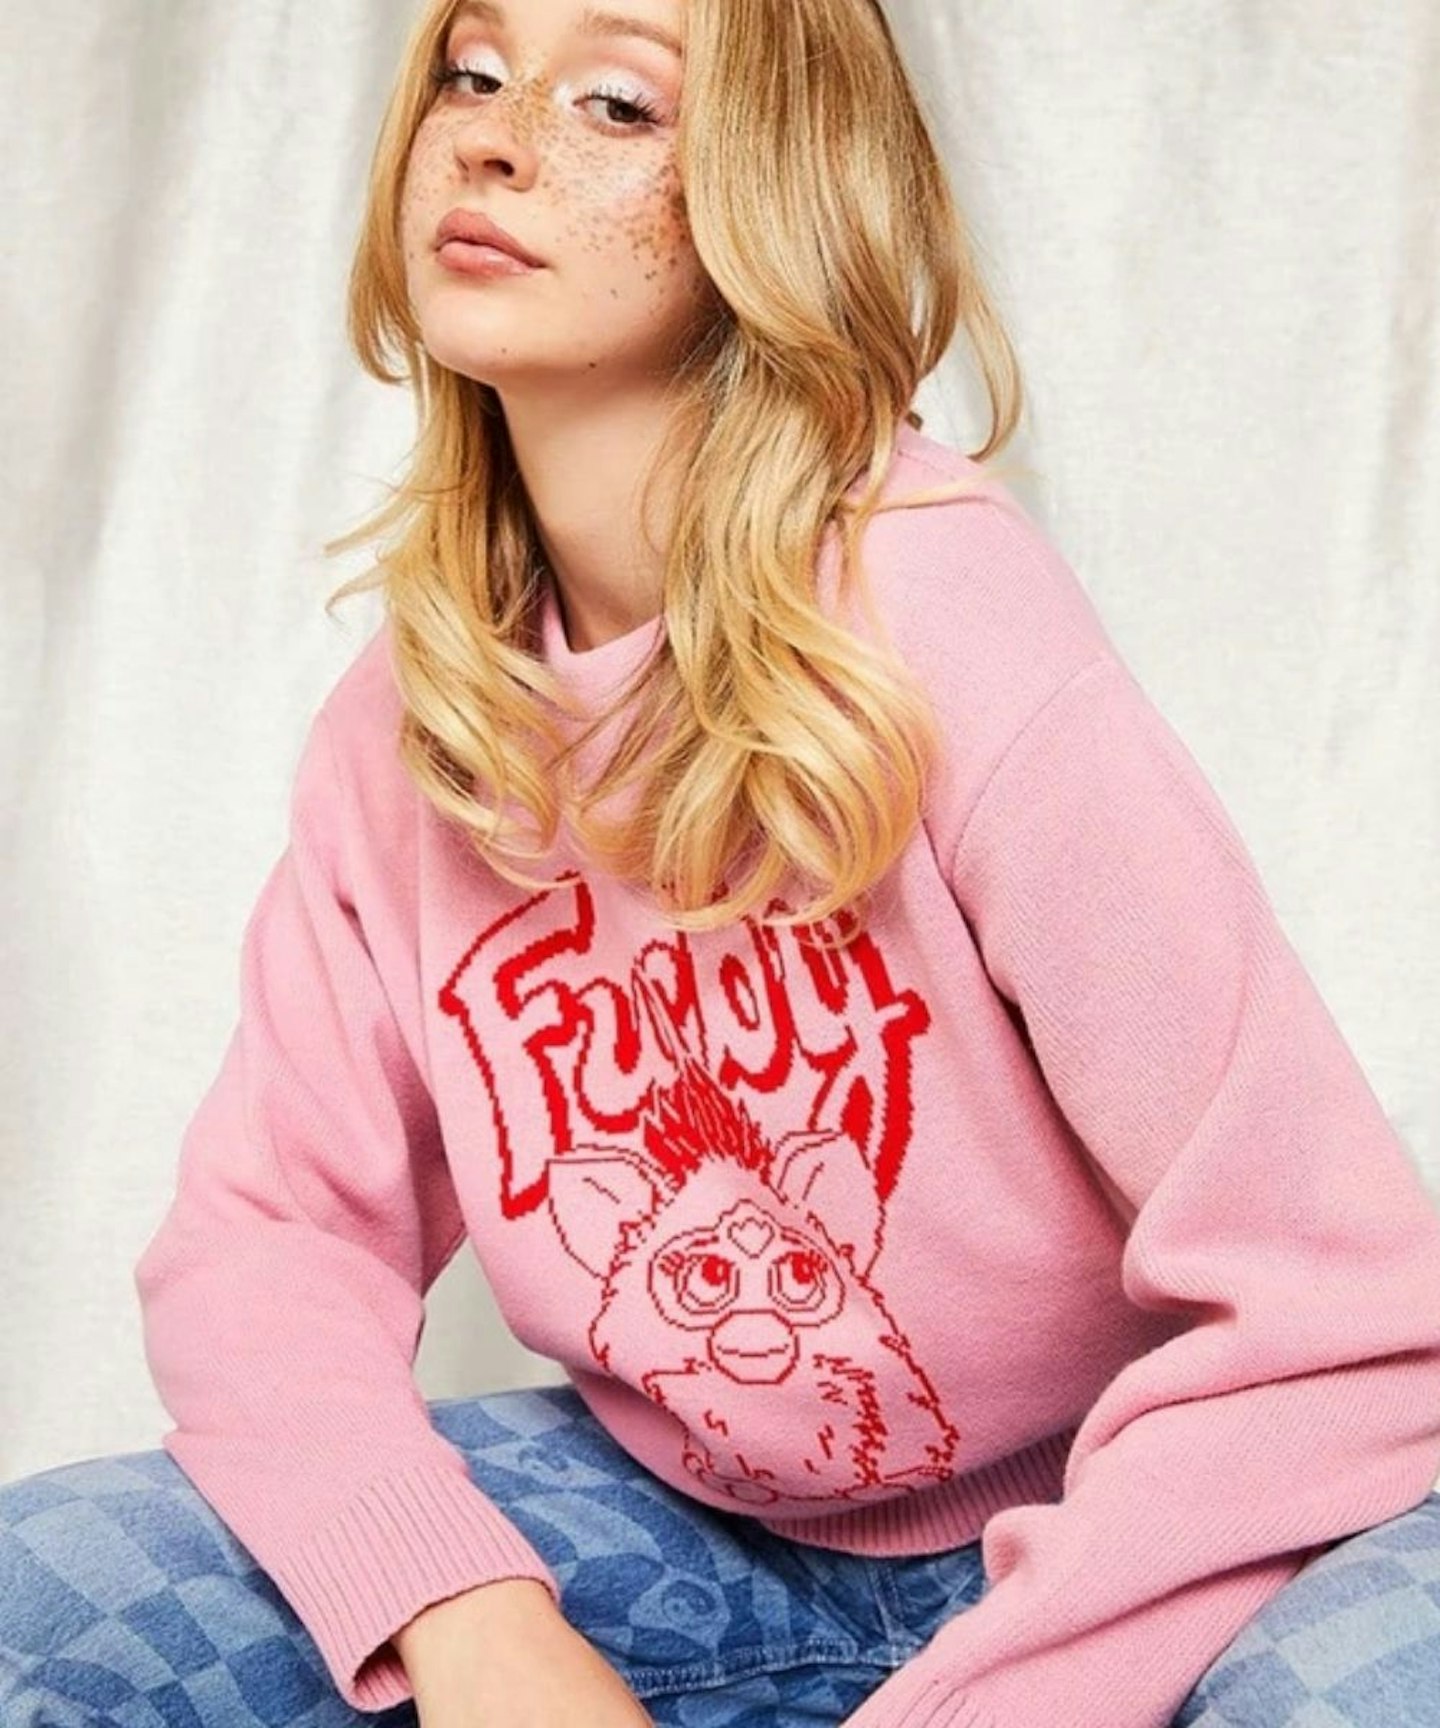 Furby x Skinnydip Pink & Red Knitted Jumper